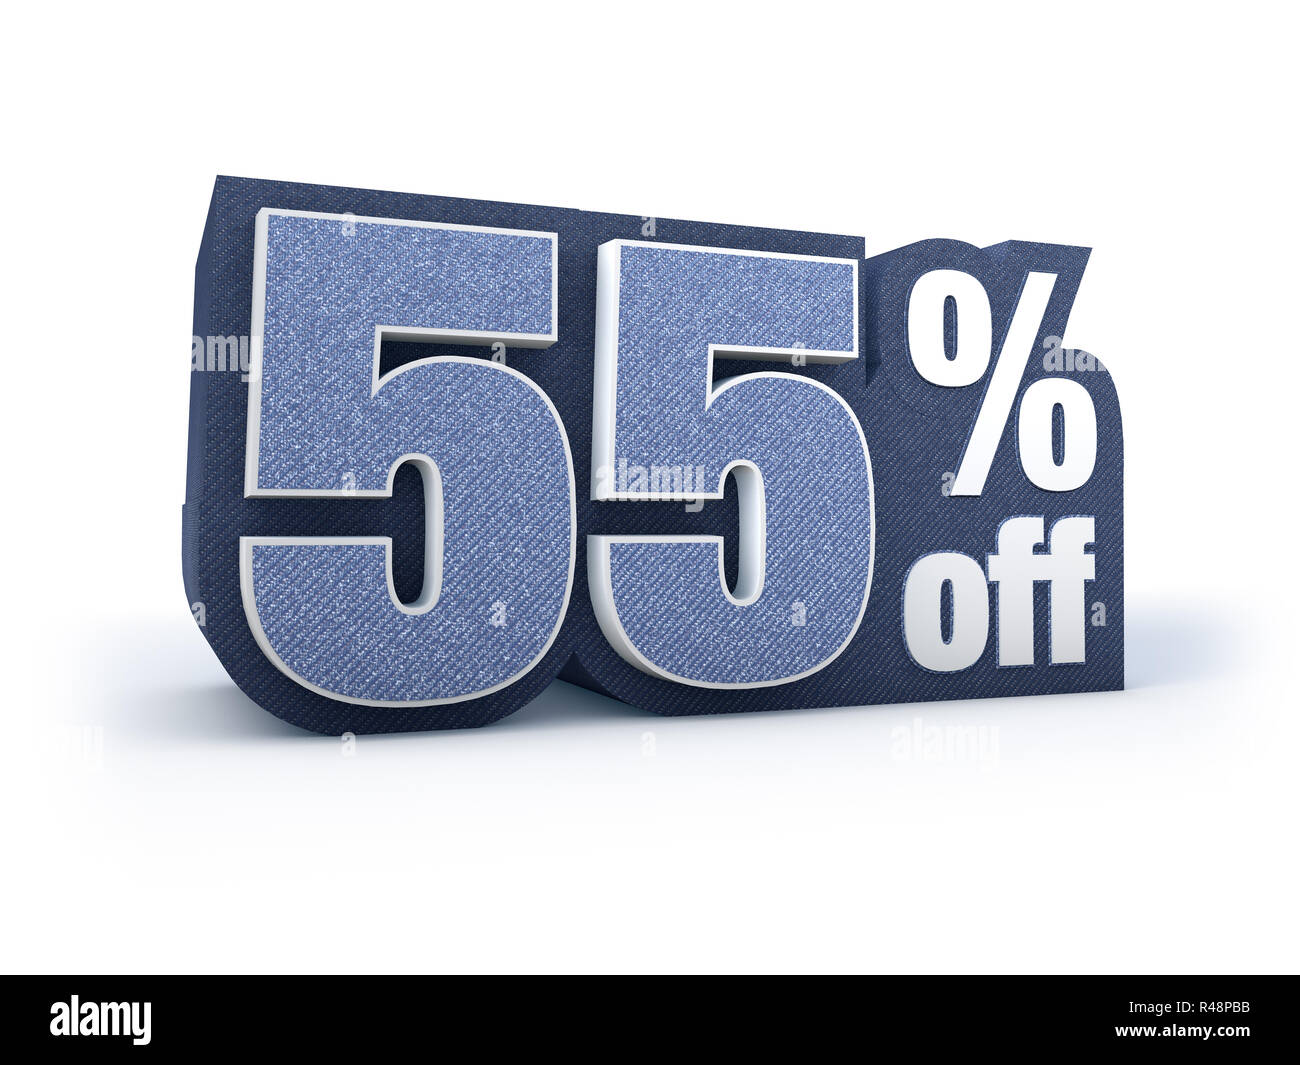 55 percent off denim styled discount price sign Stock Photo